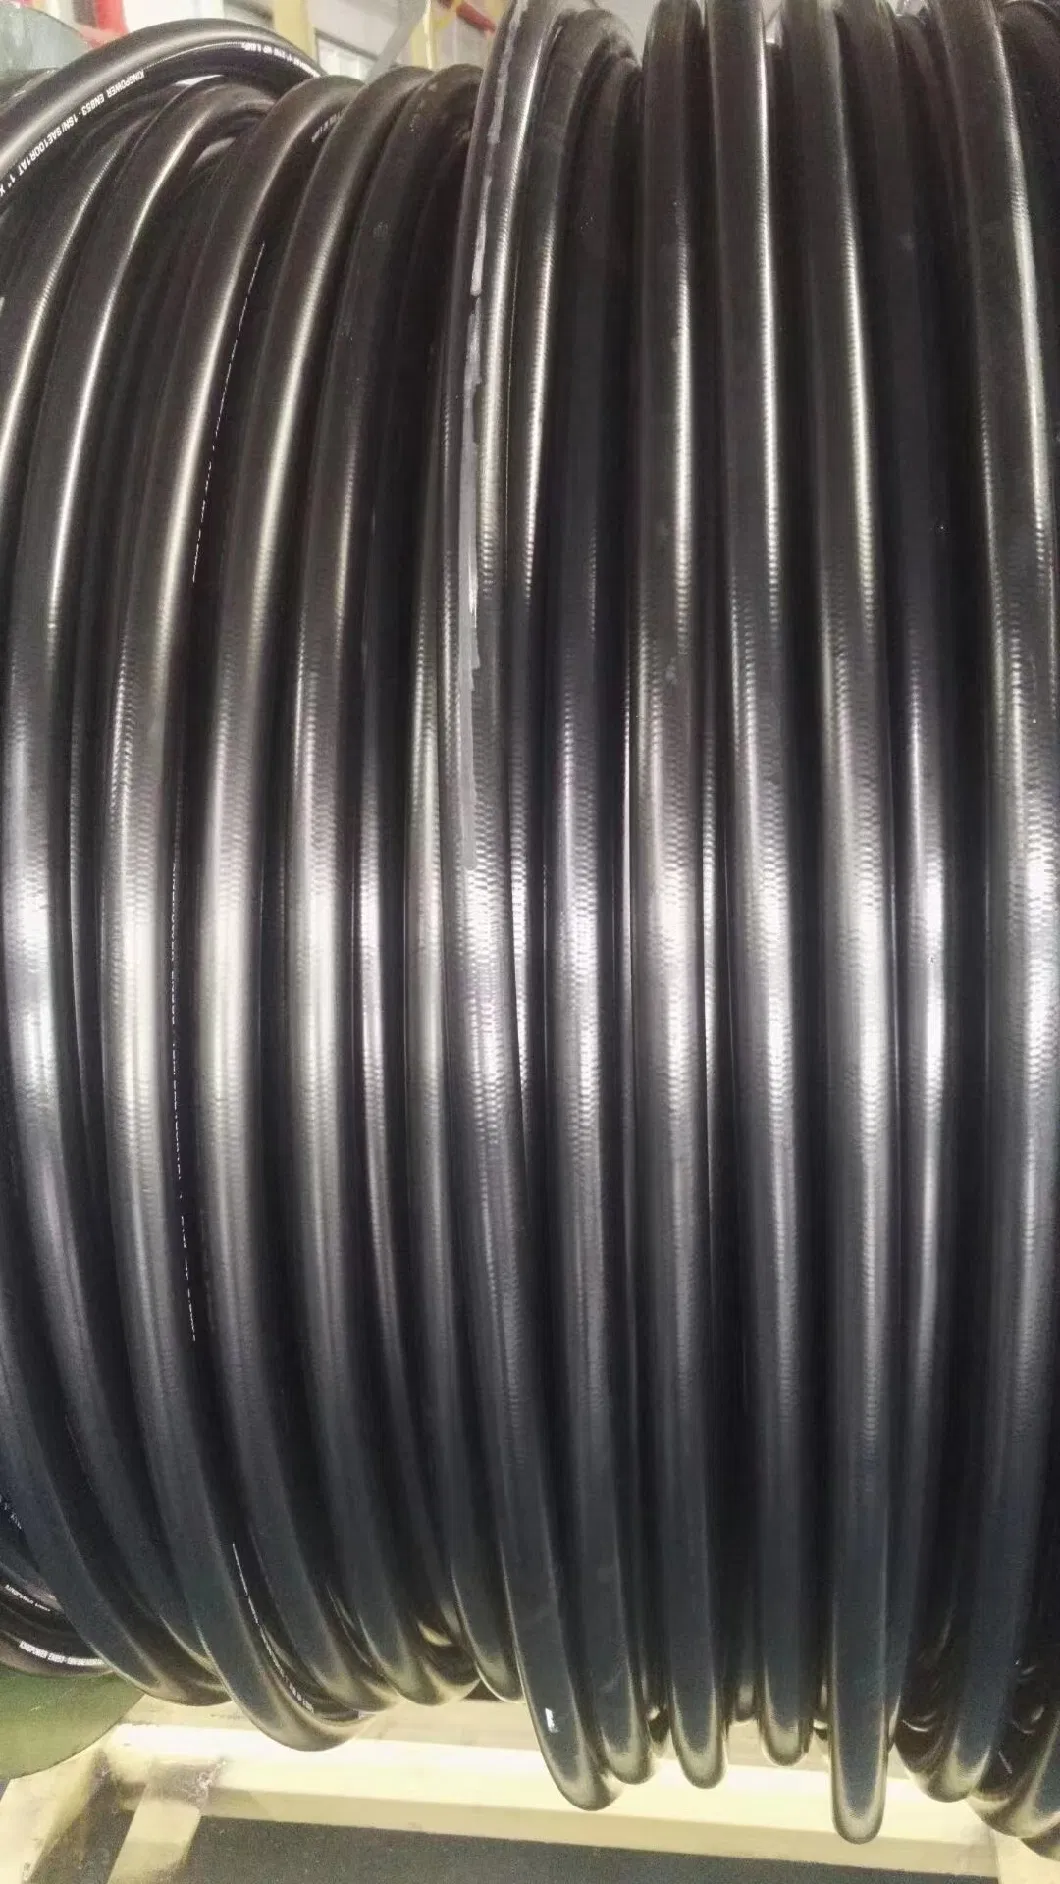 OEM High Pressure Wire Braided SAE100 R17 Black Hydraulic Oil Rubber Delivery Hose Pipe